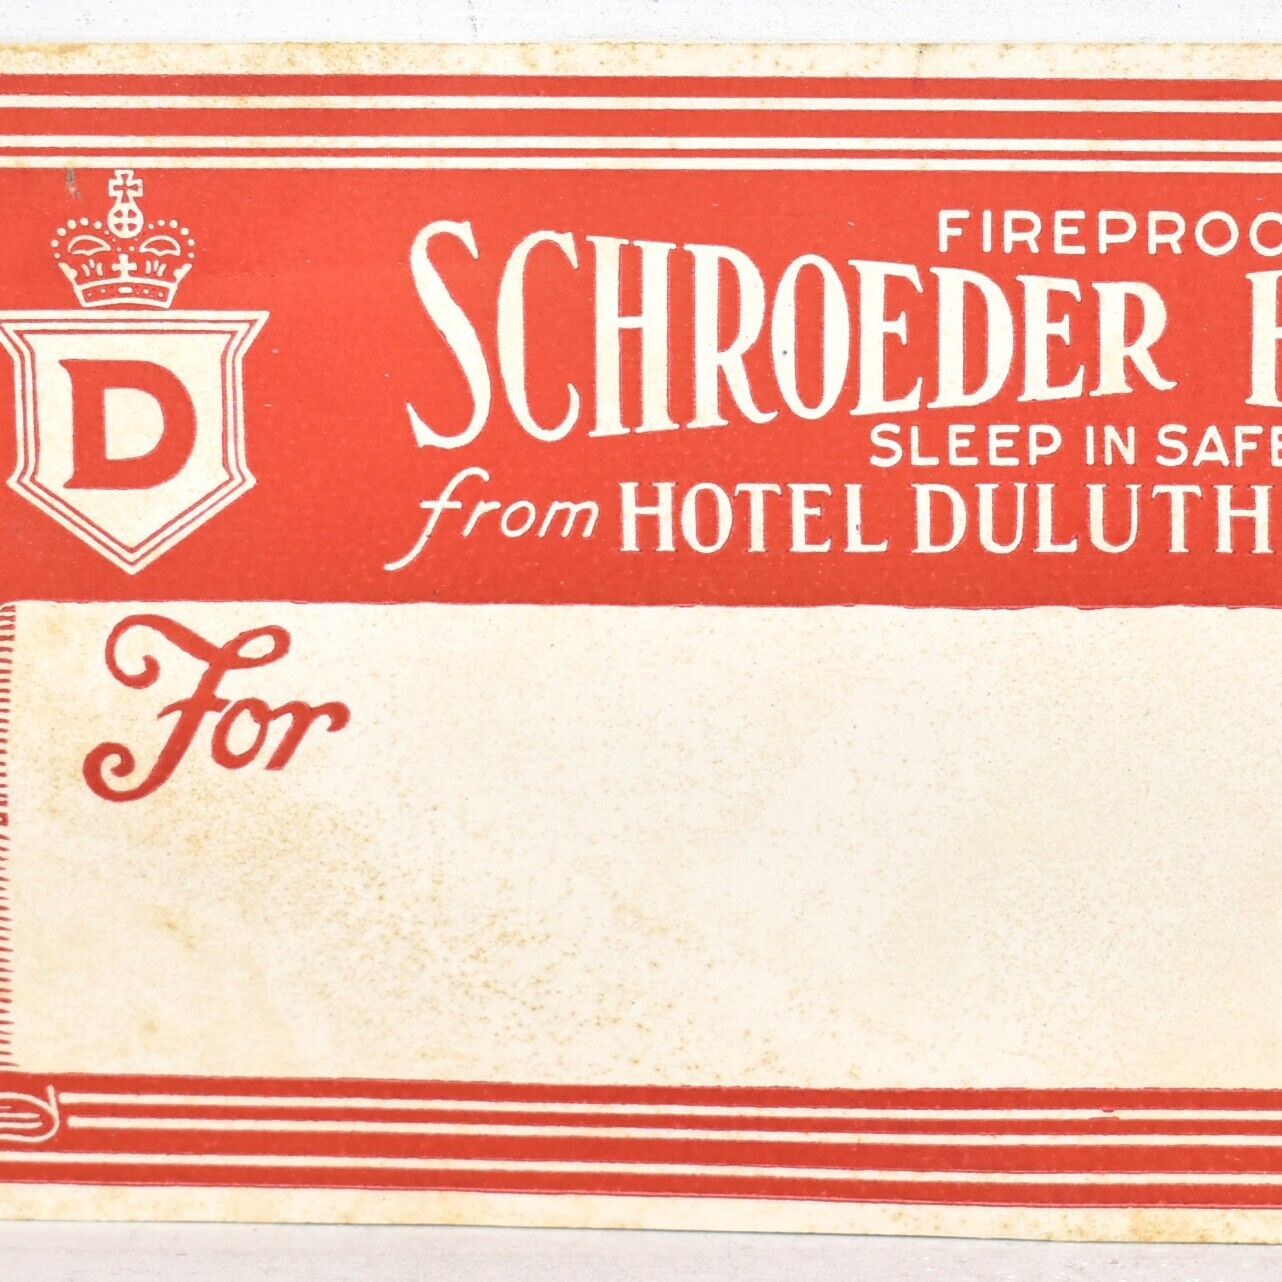 1900s Fireproof Schroeder Duluth Hotel Luggage Label St Louis County Minnesota